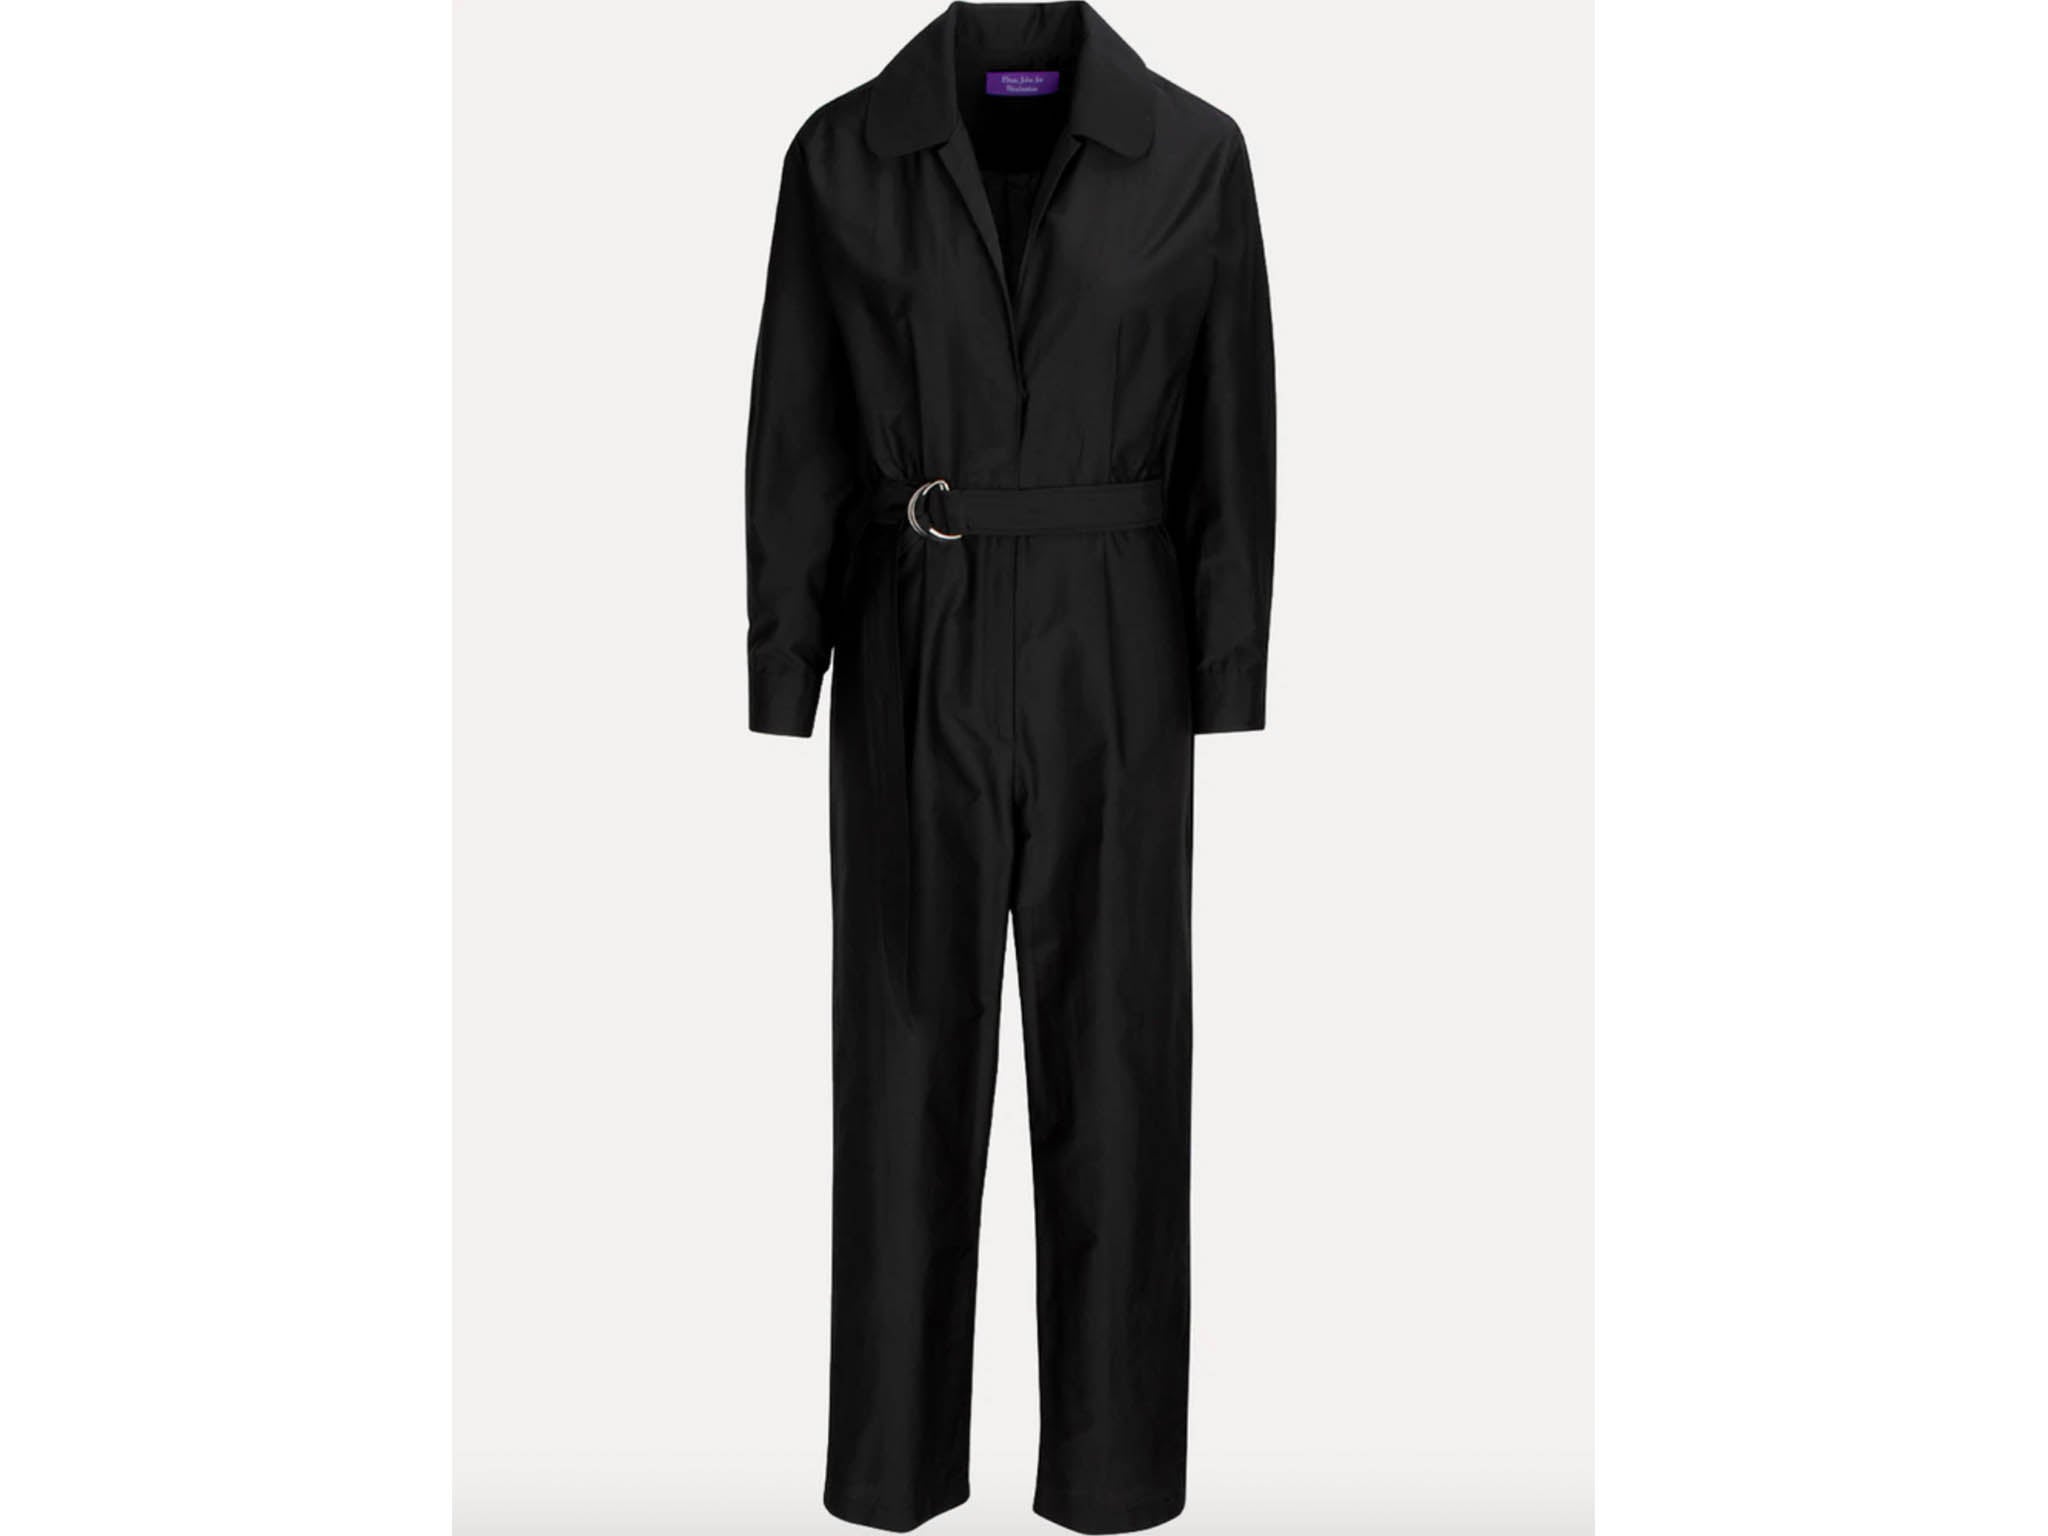 For an easy all-in-one, this long-sleeved jumpsuit is perfect